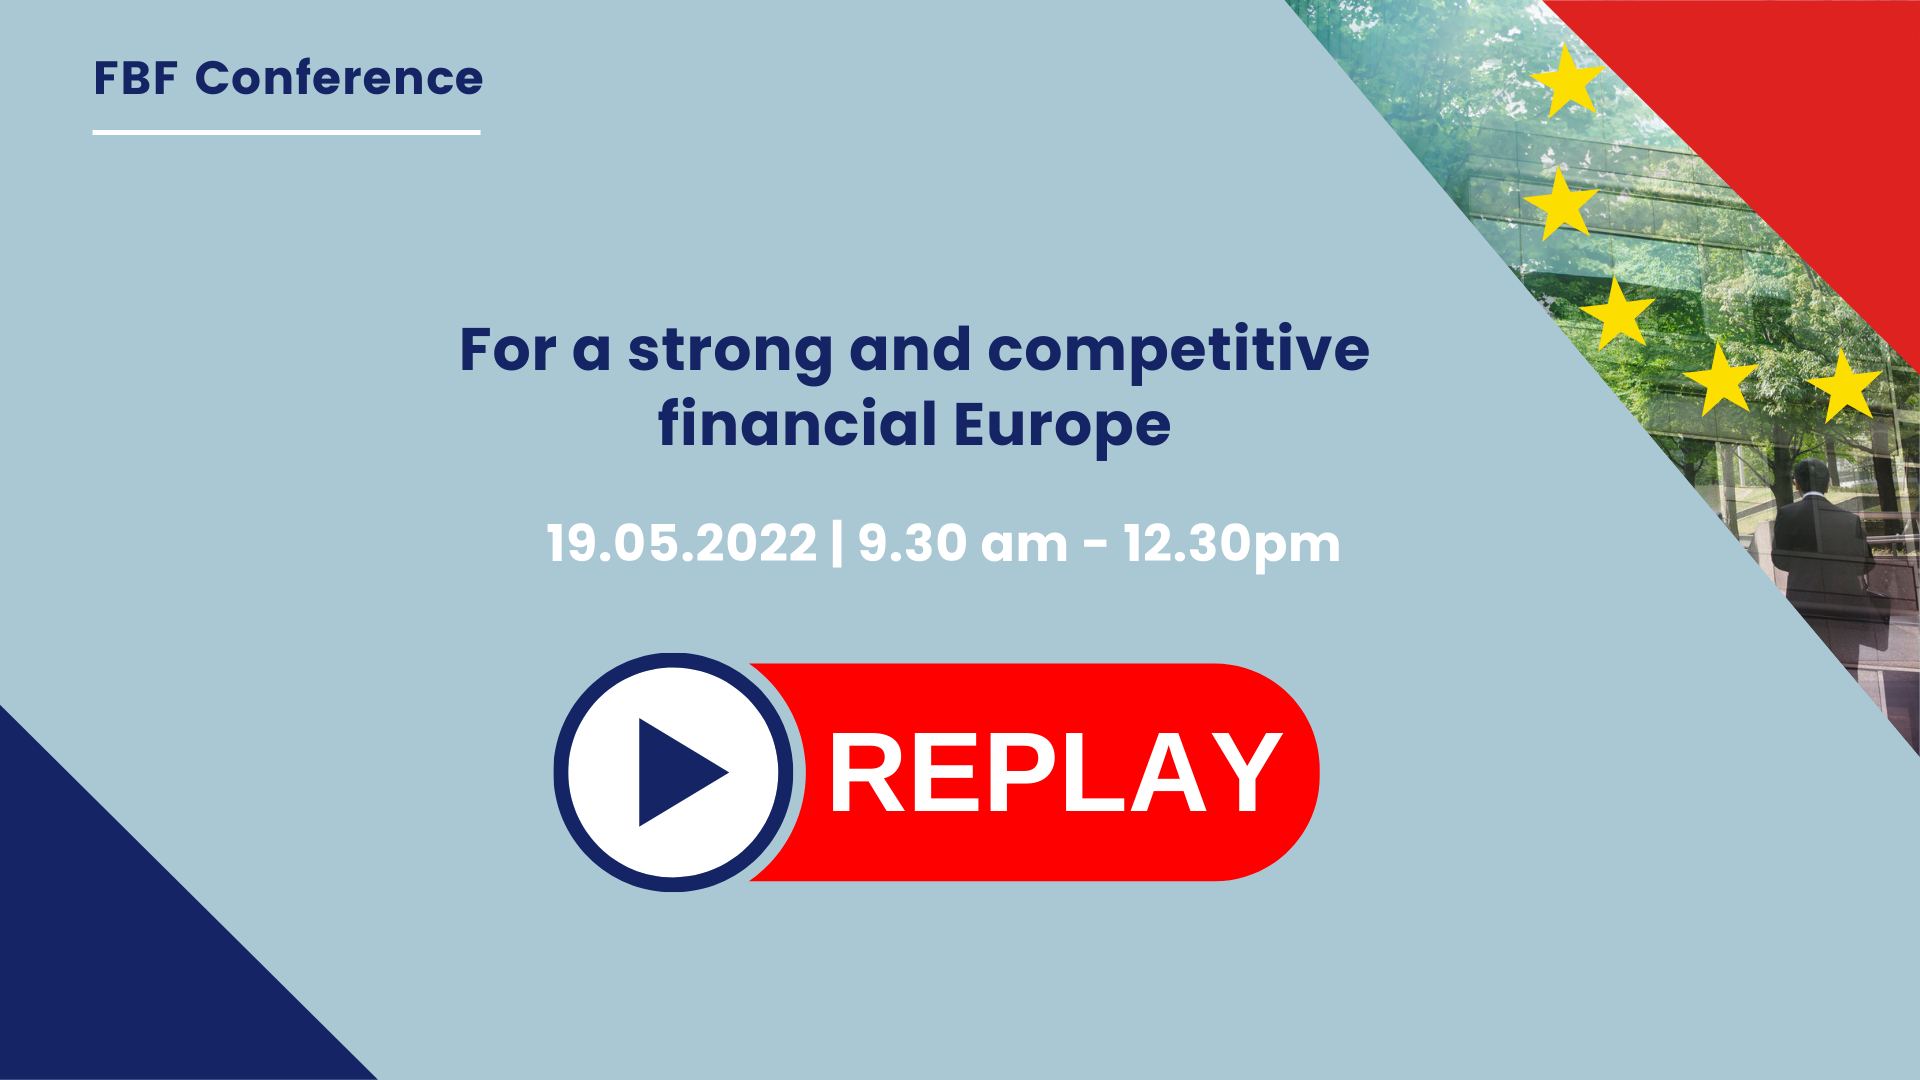 [Replay] For a strong and competitive financial Europe: a FBF conference